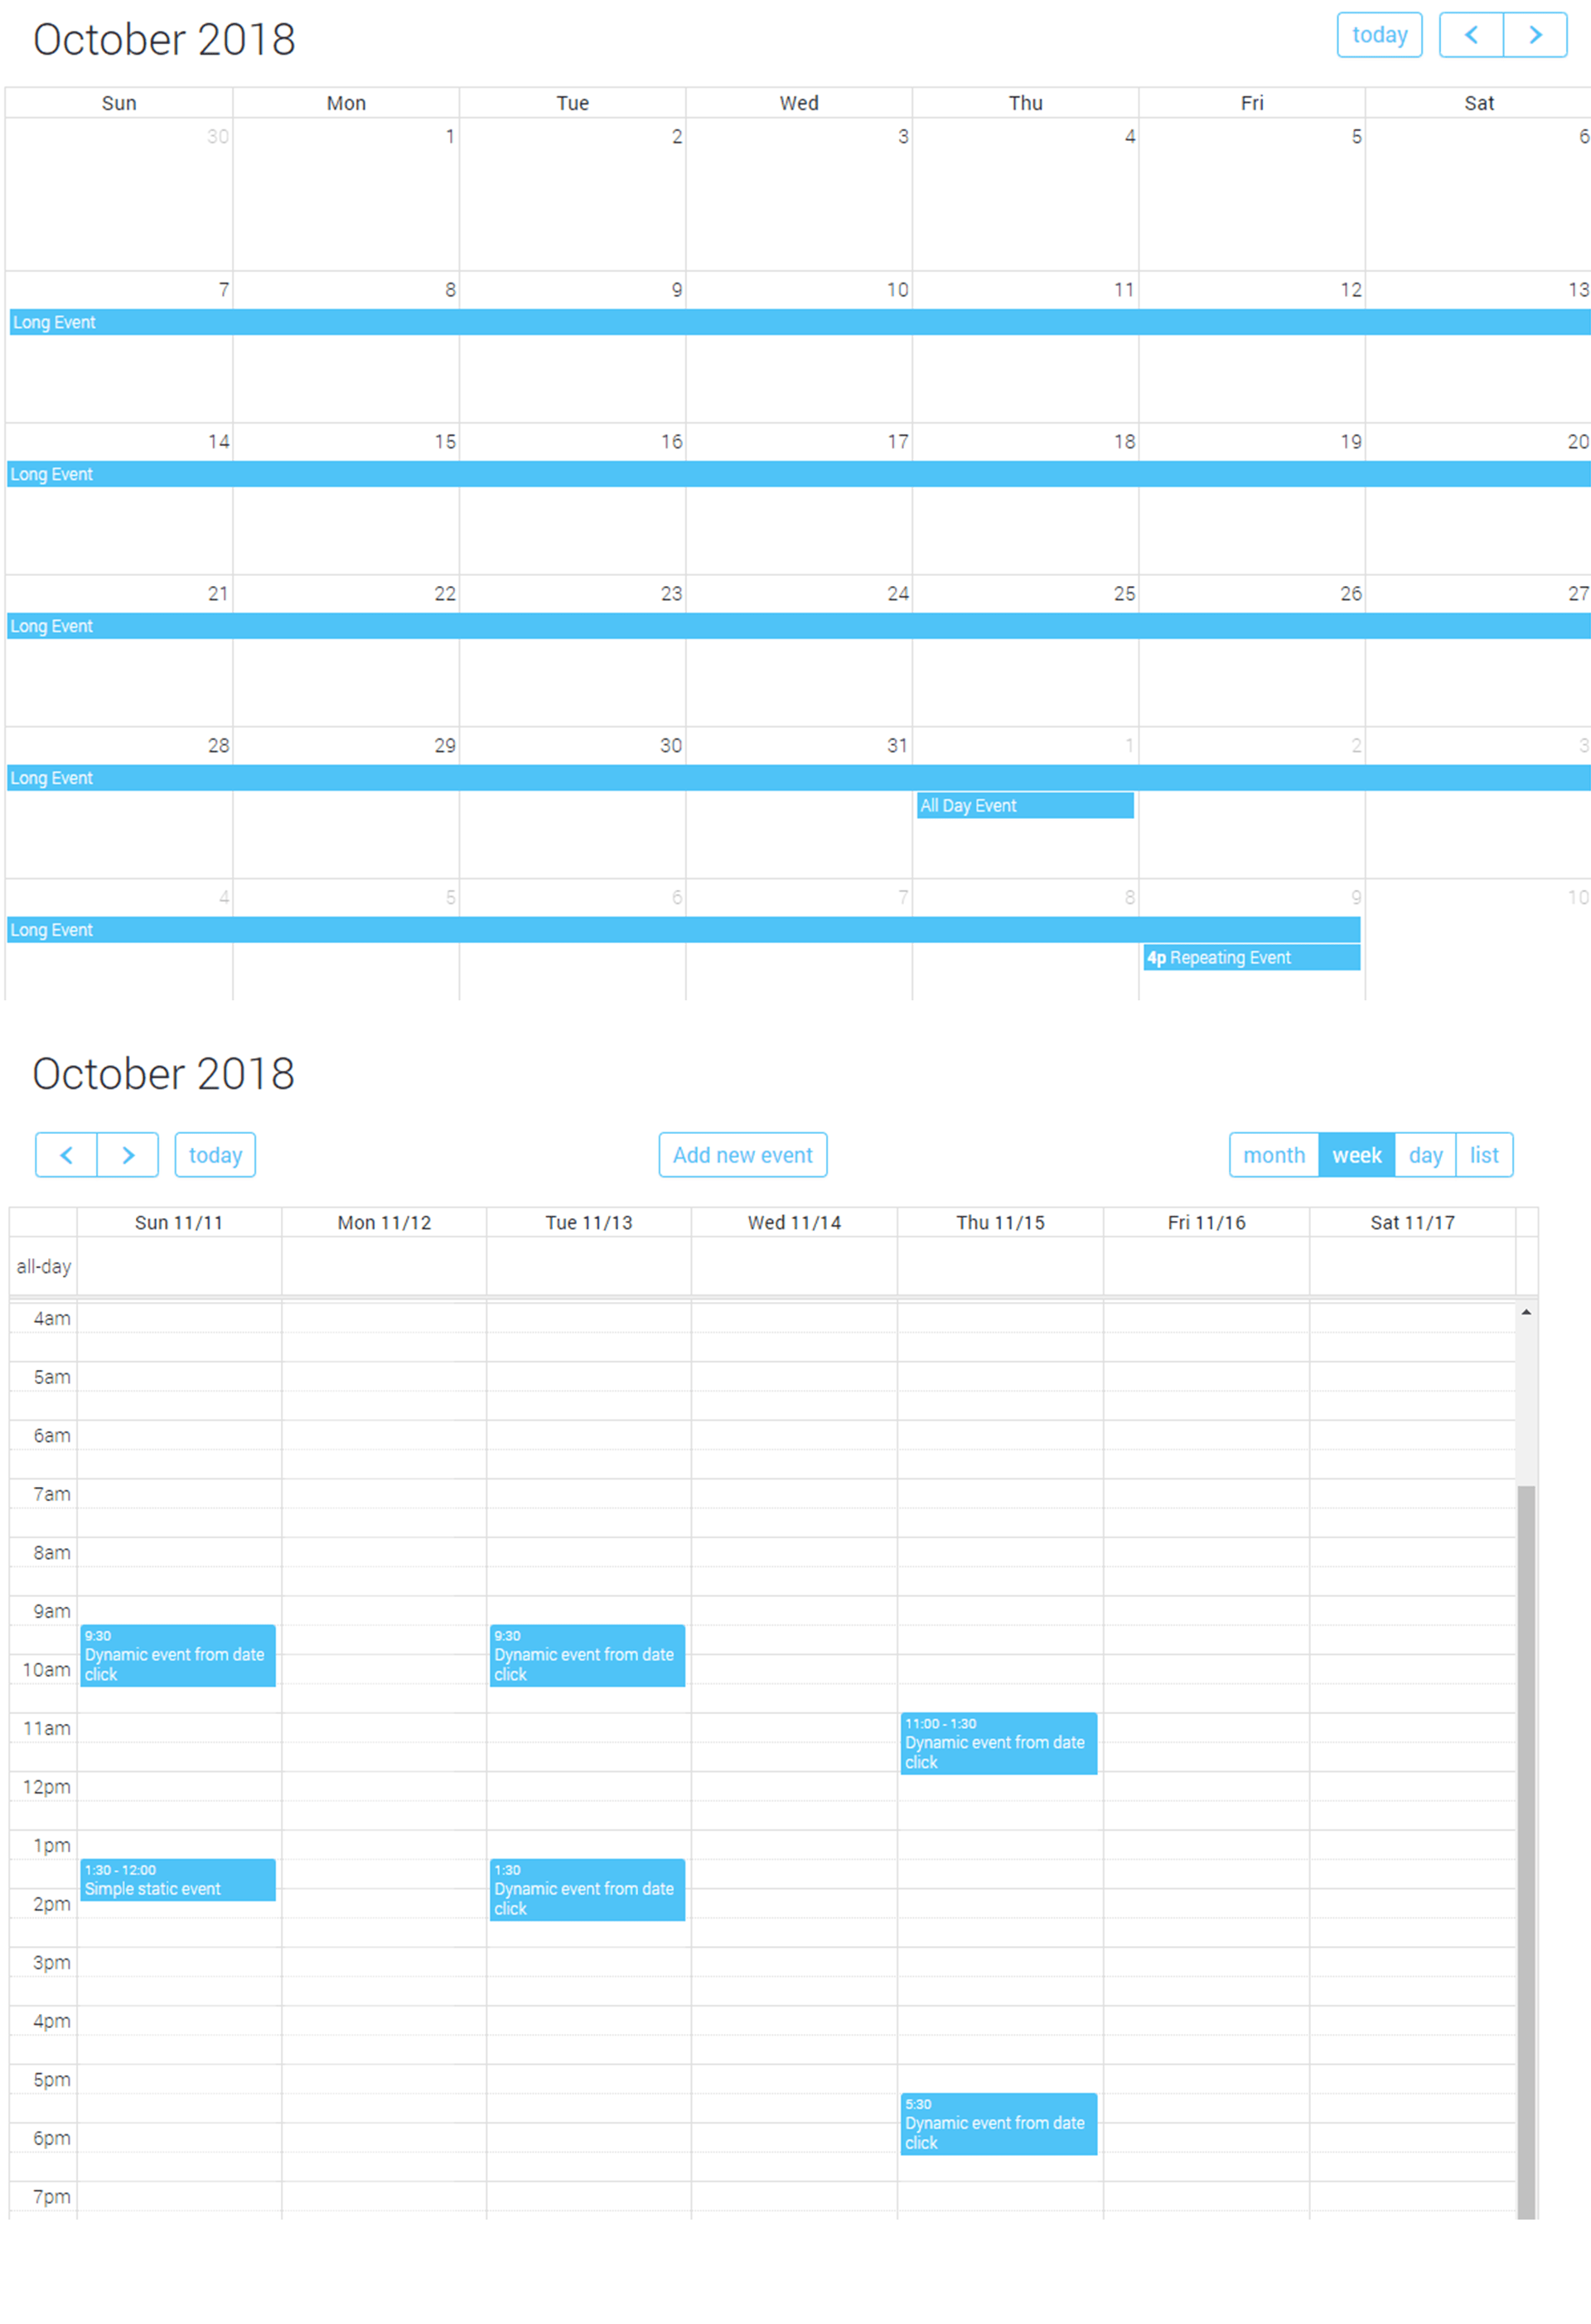 install php calendar extension